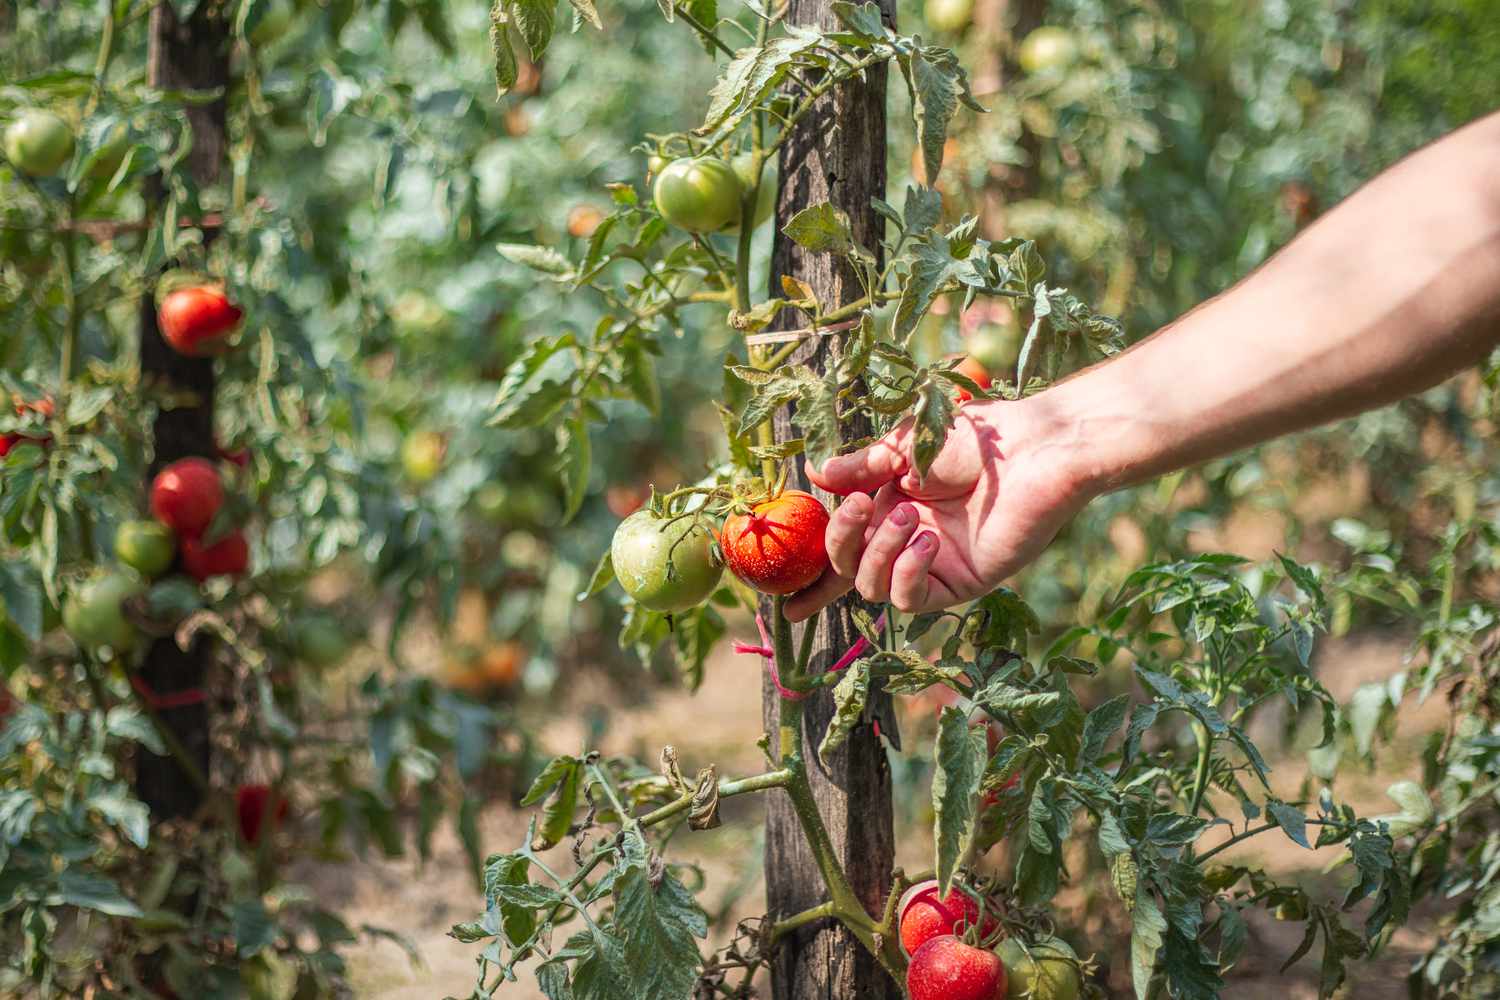 Indeterminate vs determinate tomatoes – know the differences with these expert tips